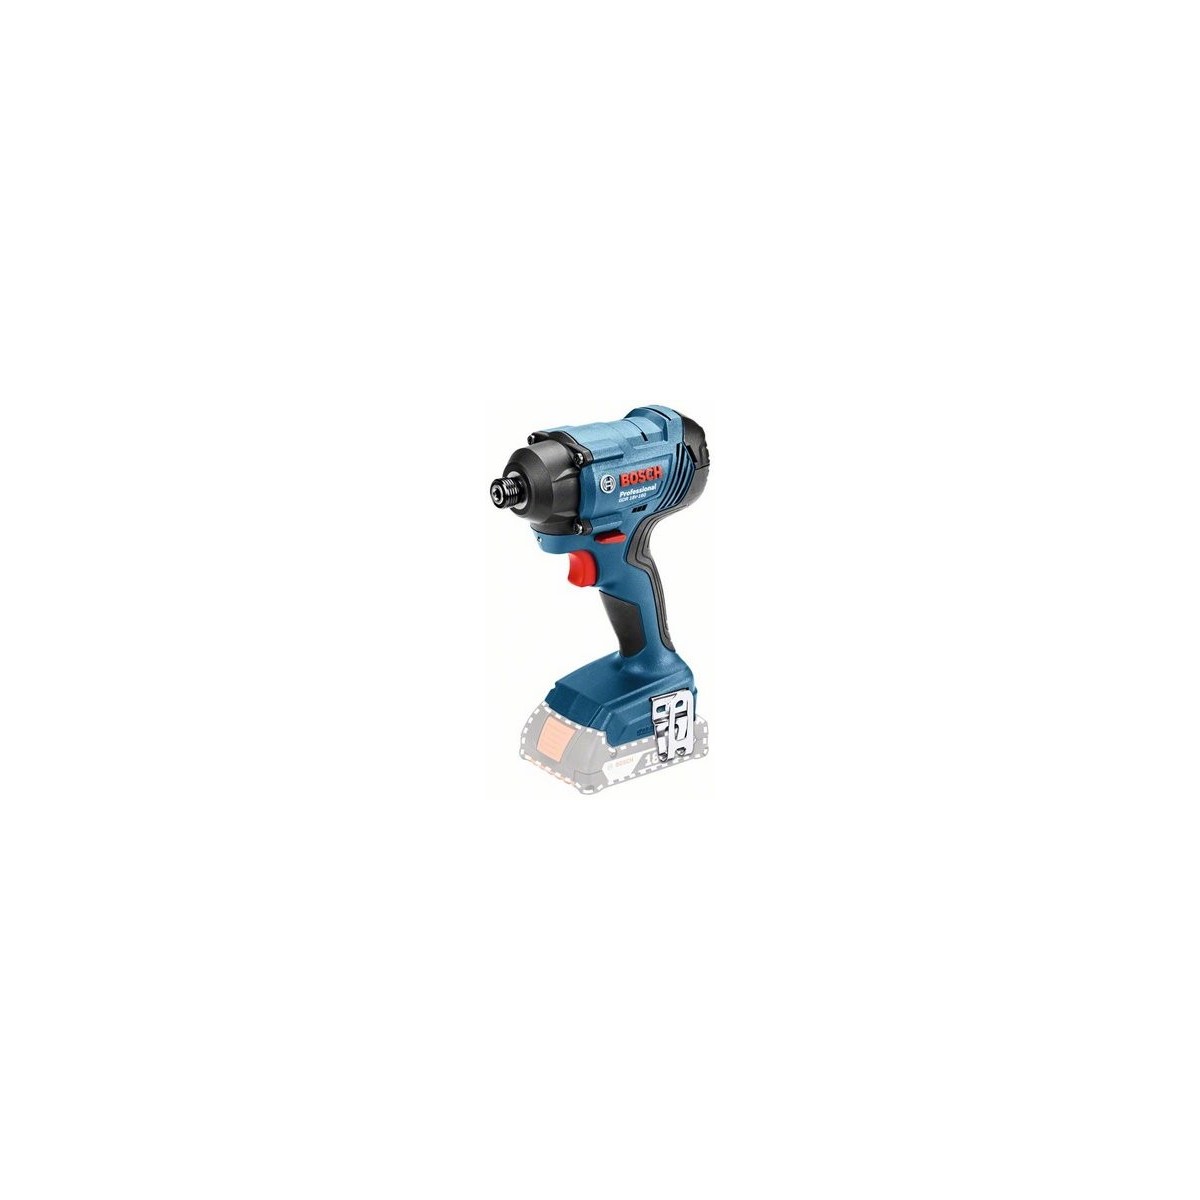 BOSCH Cordless Impact Wrench GDR 18V-160, SOLO, 160Nm, 06019G5106